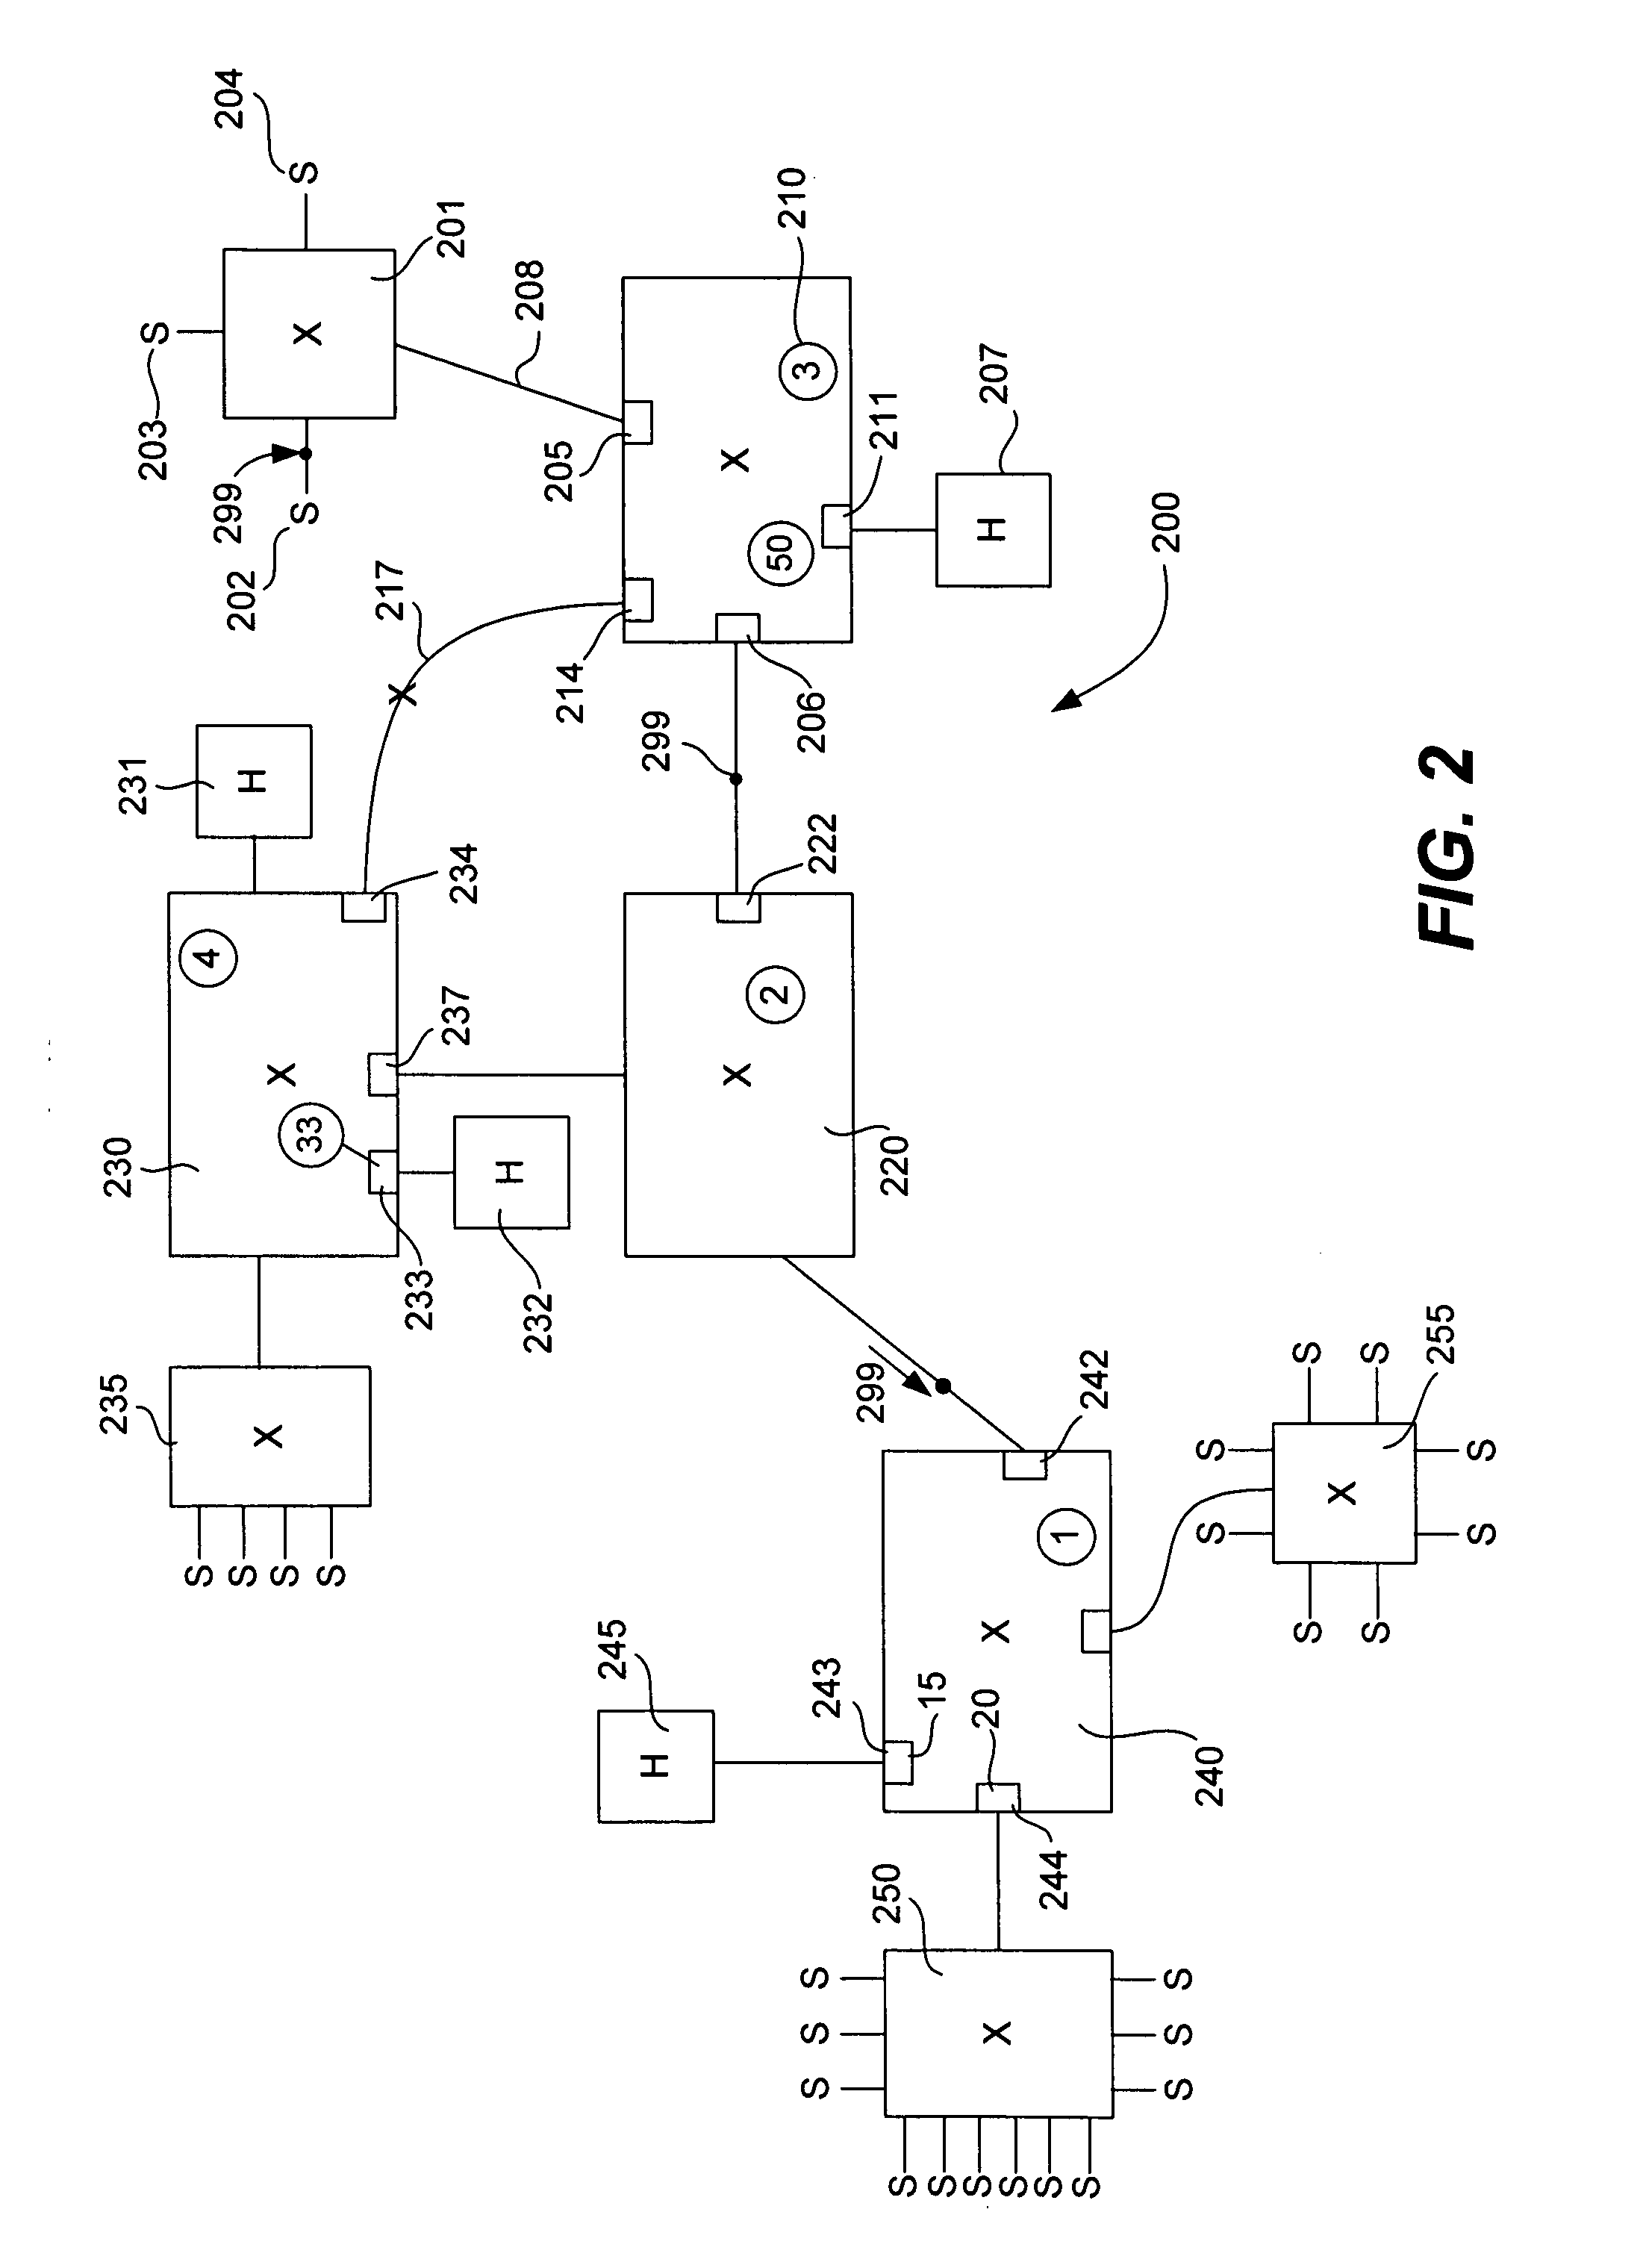 Forwarding table reduction and multipath network forwarding